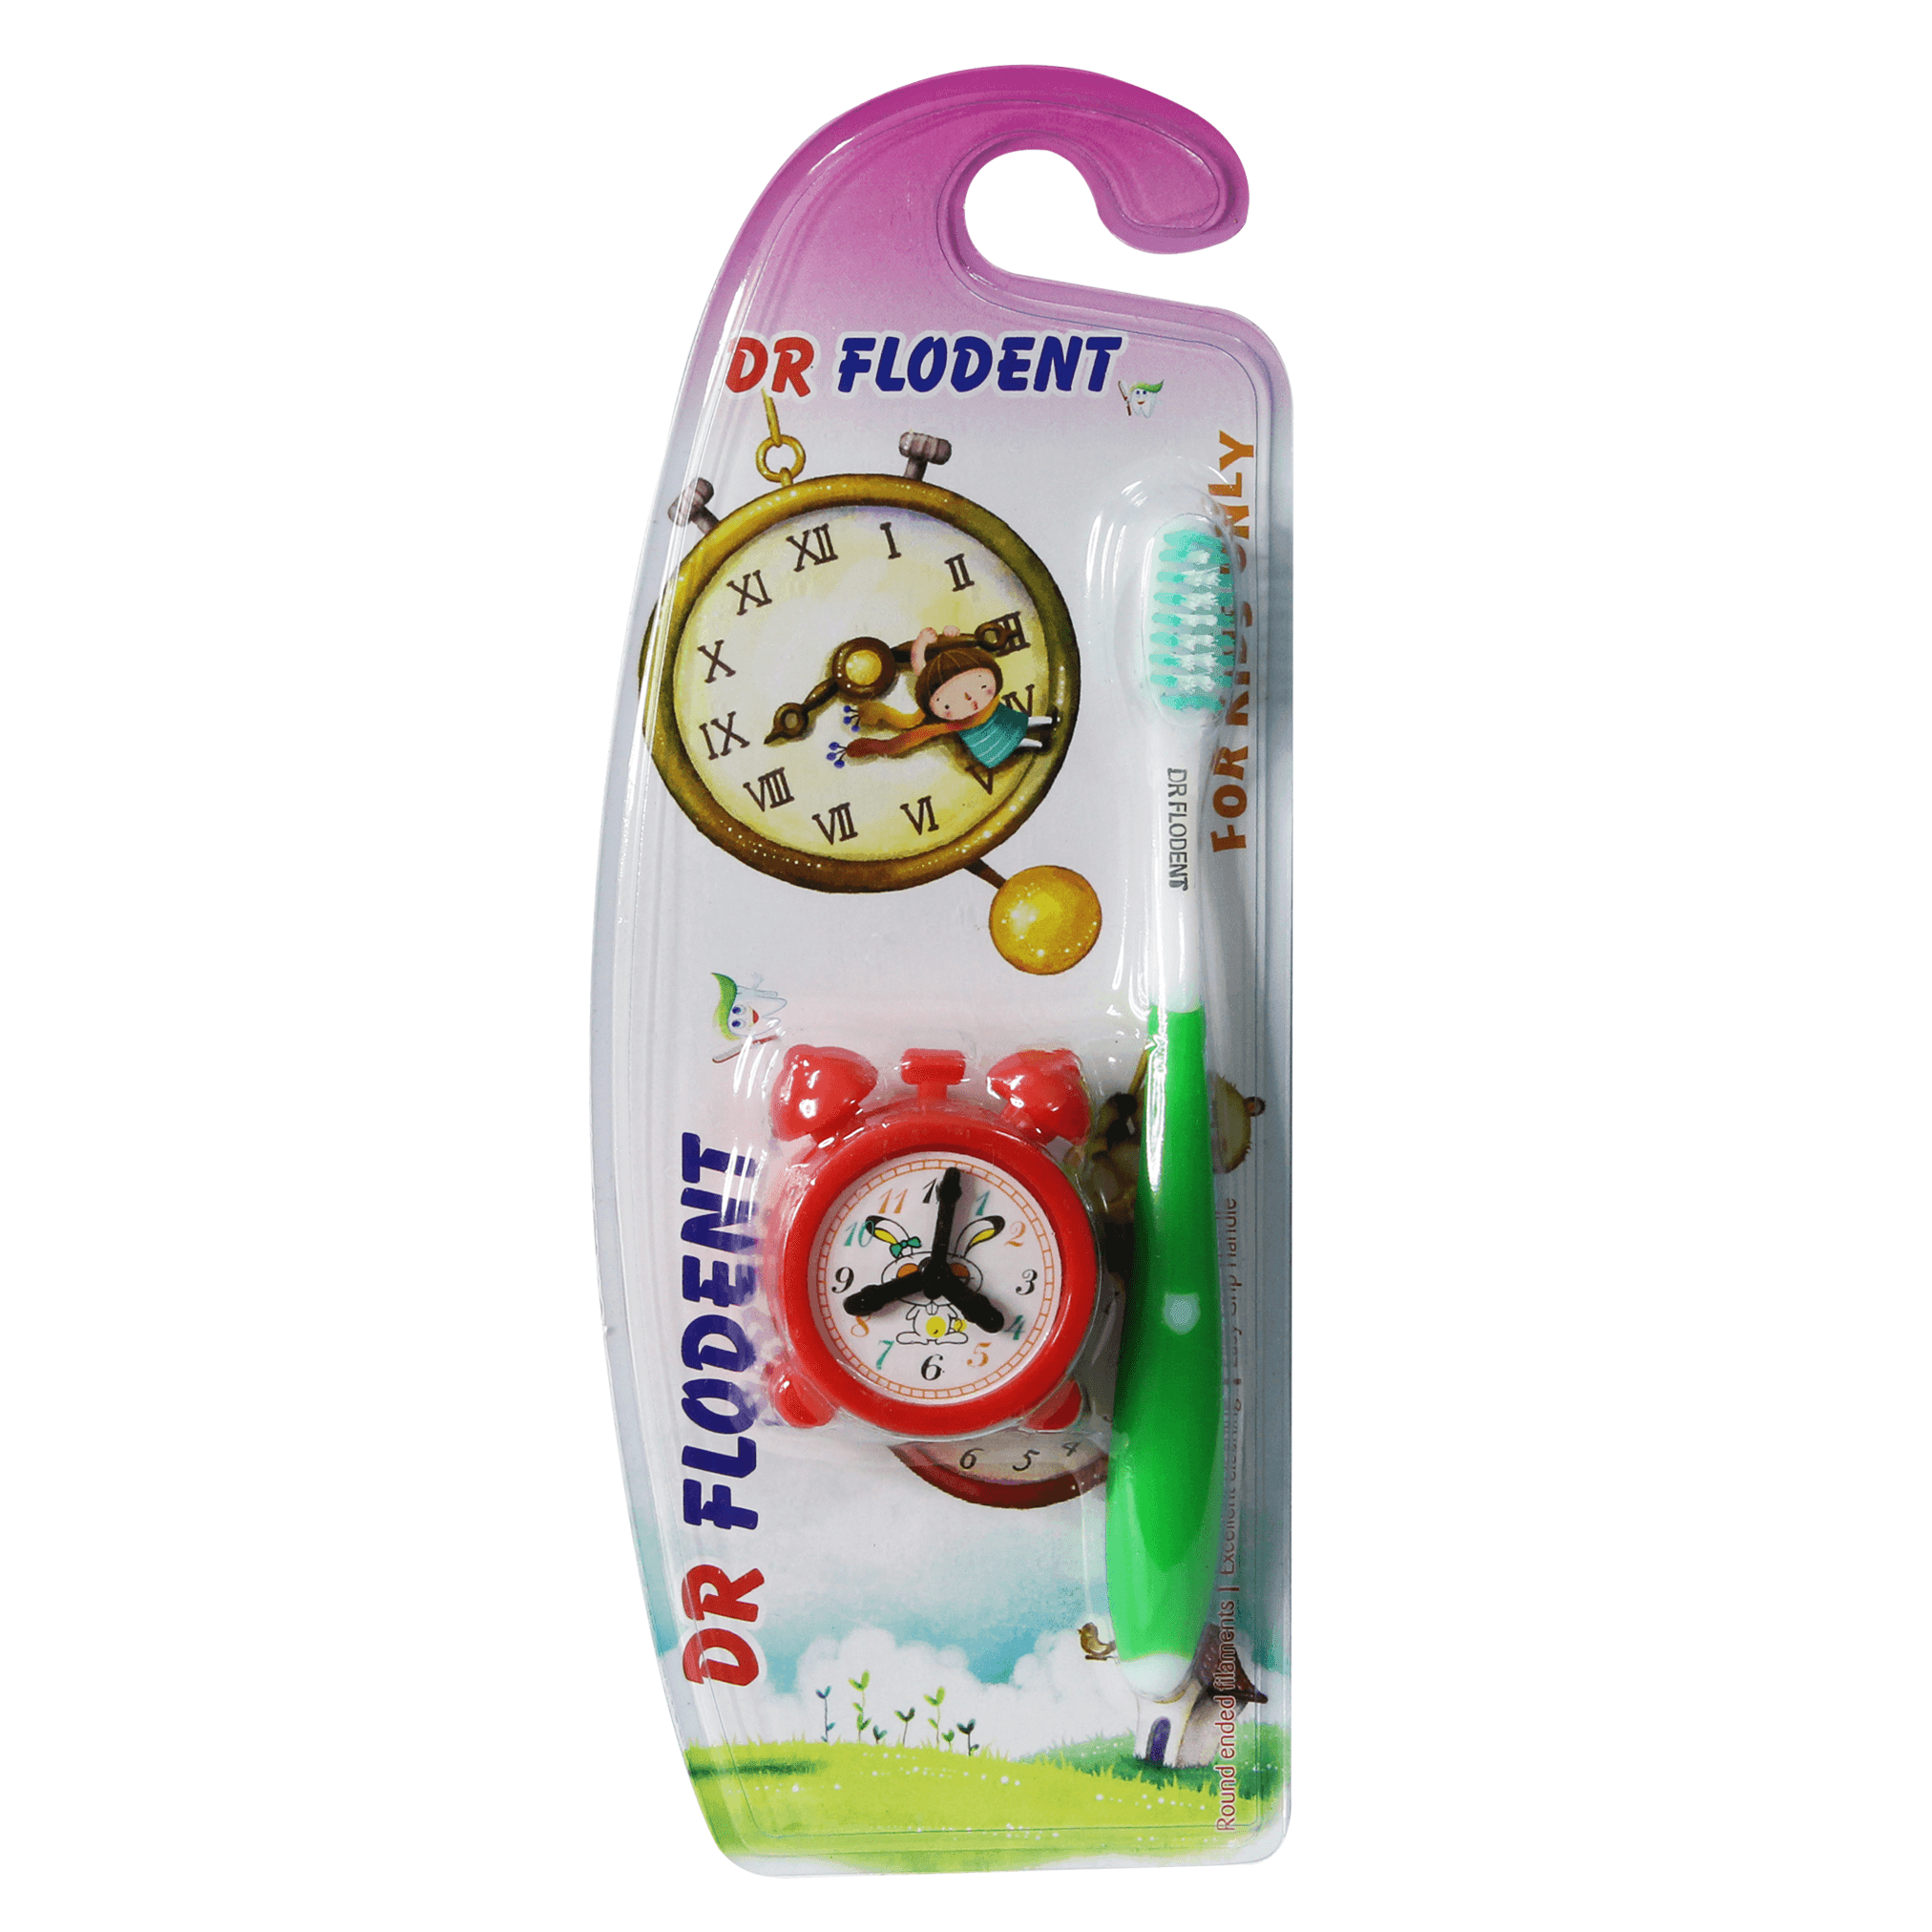 Dr Flodent Kids Toothbrush Extra Soft With Alarm Toy - BumbleToys - 2-4 Years, 5-7 Years, Baby Saftey & Health, Boys, Girls, Toothbrush